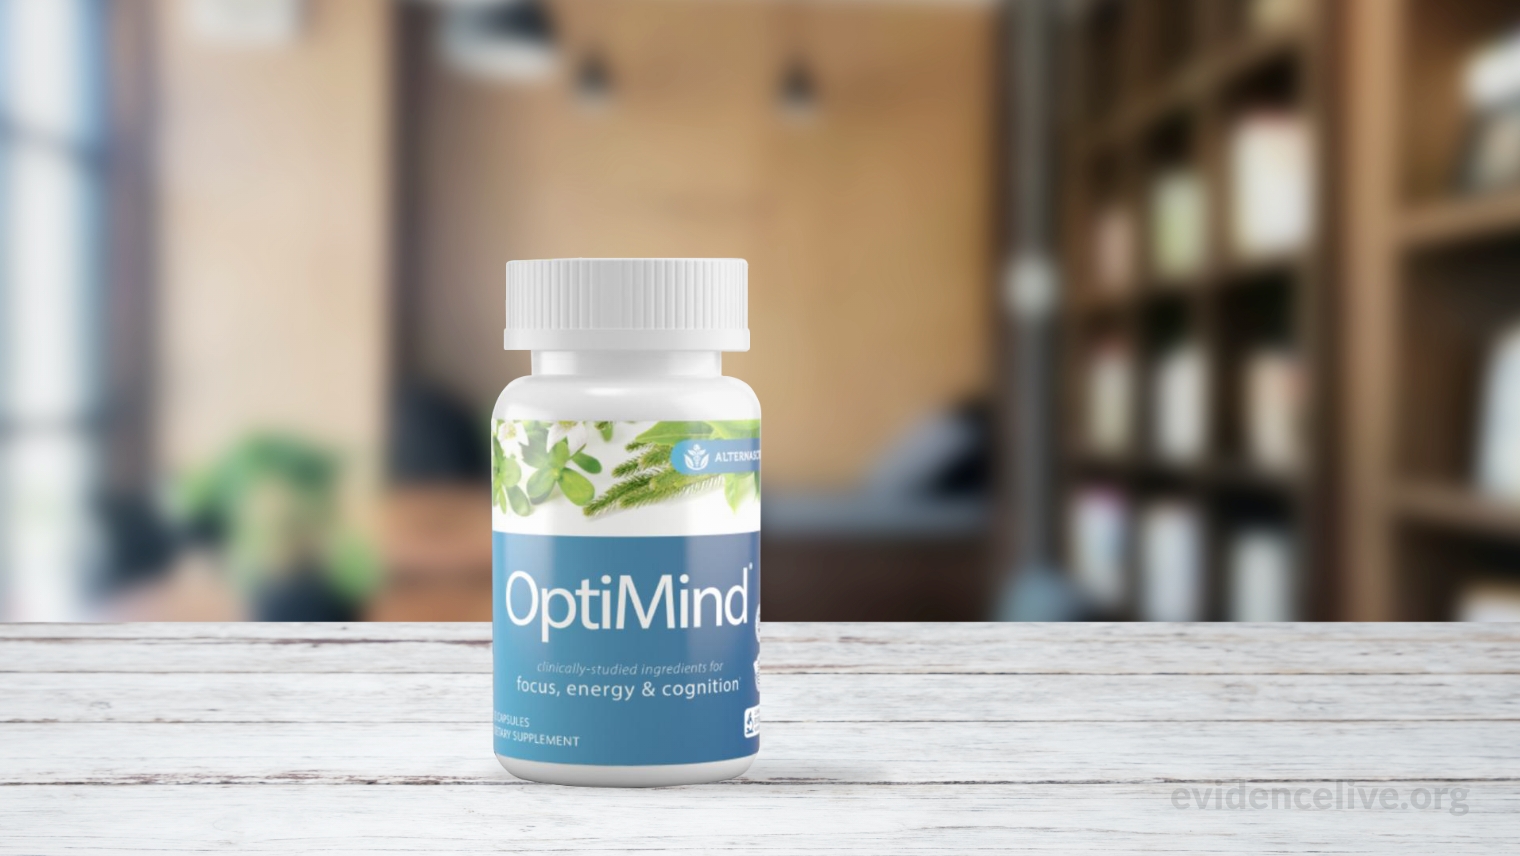 OptiMind benefits and effects